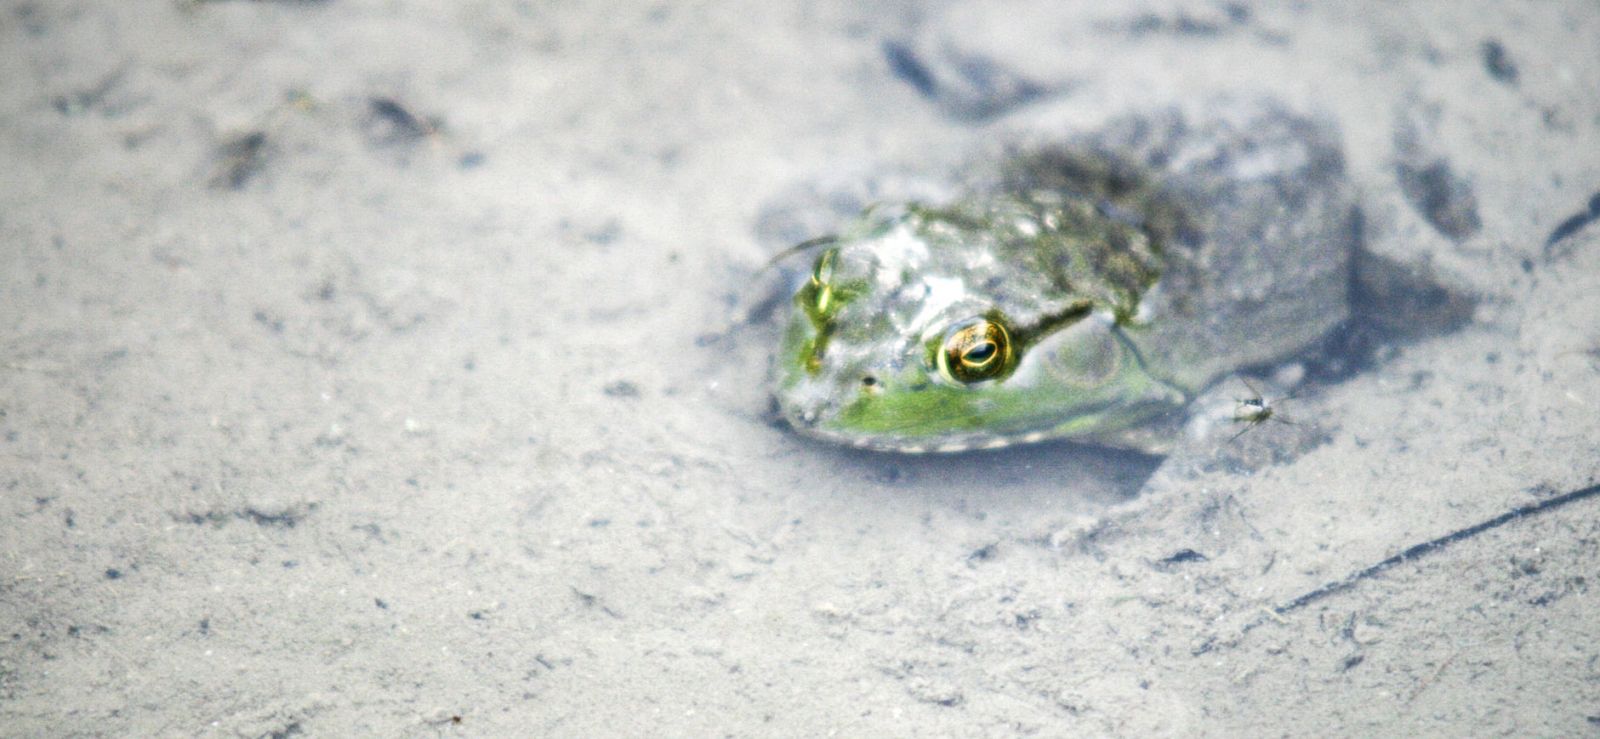 close-up of a frog submersed in water